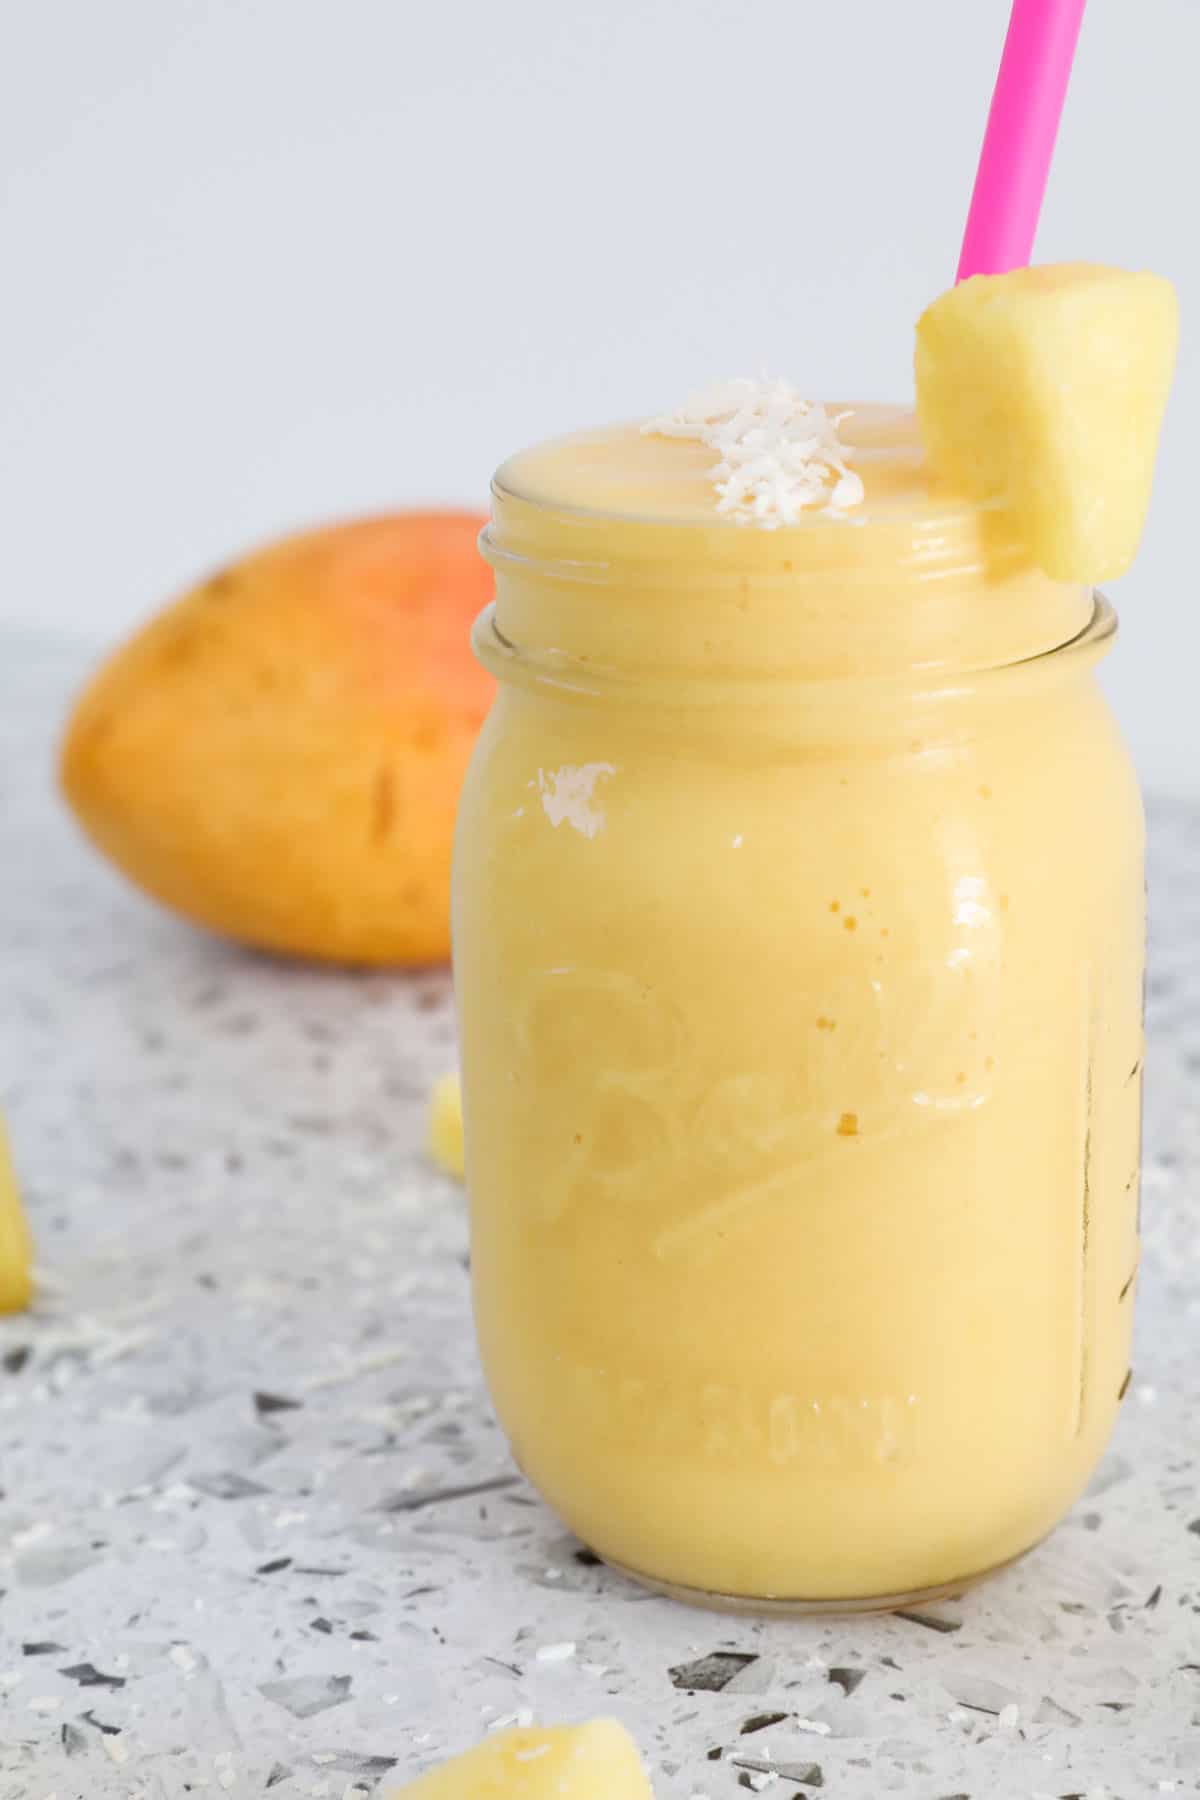 A smoothie in a glass jar with a mango in the background.